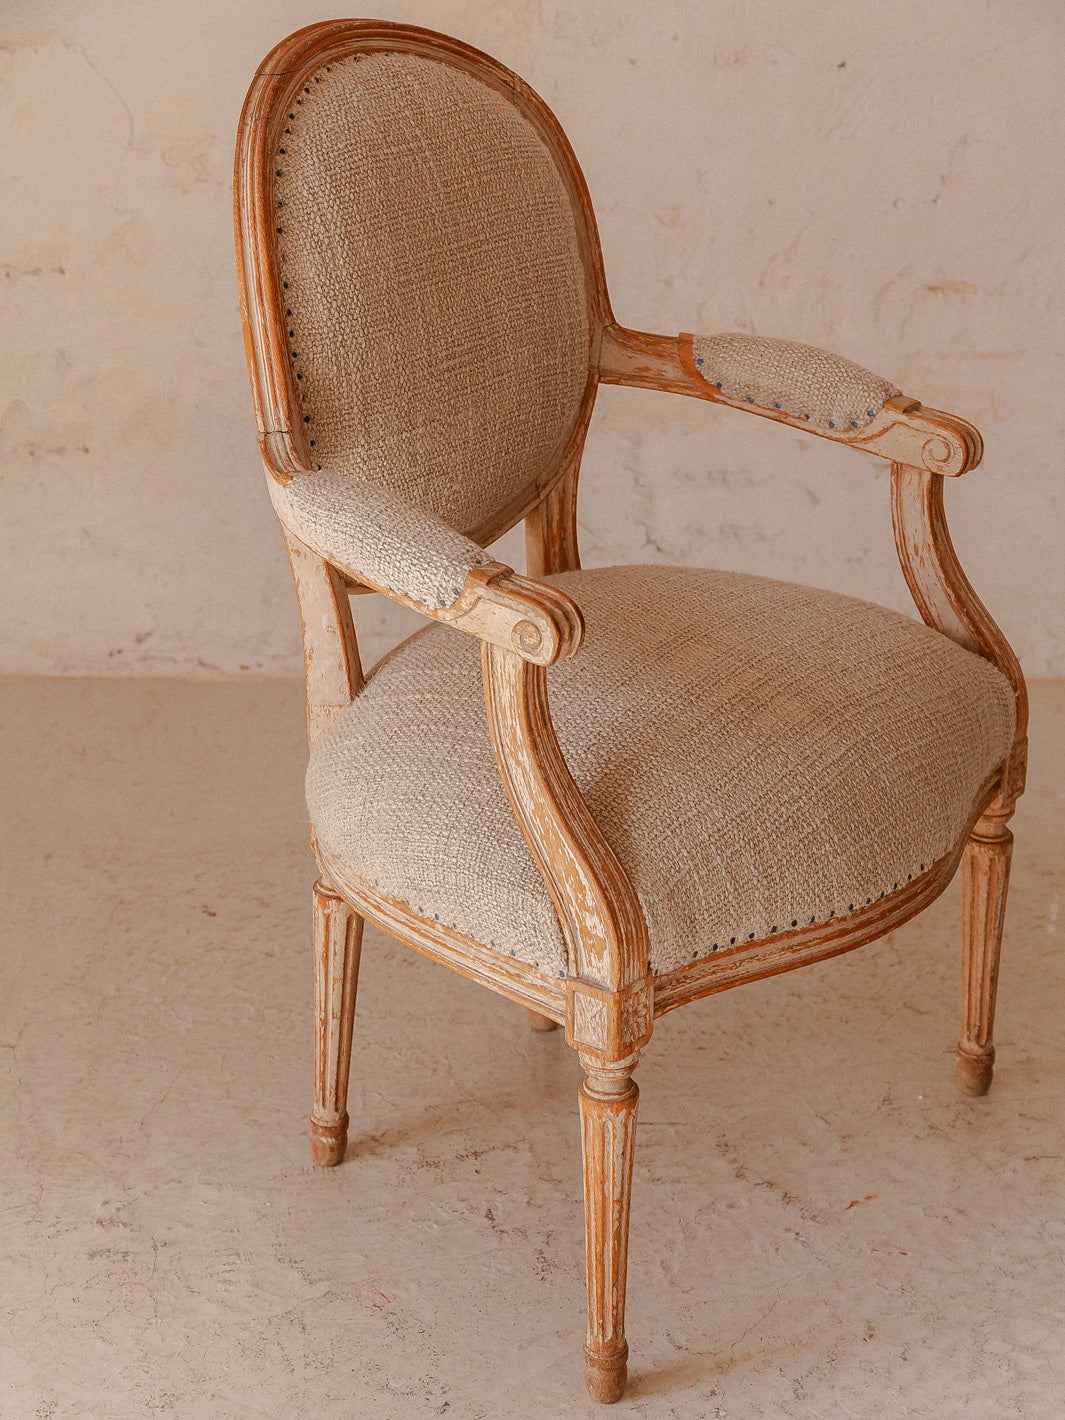 Pair of Gustavian armchairs from the 19th century